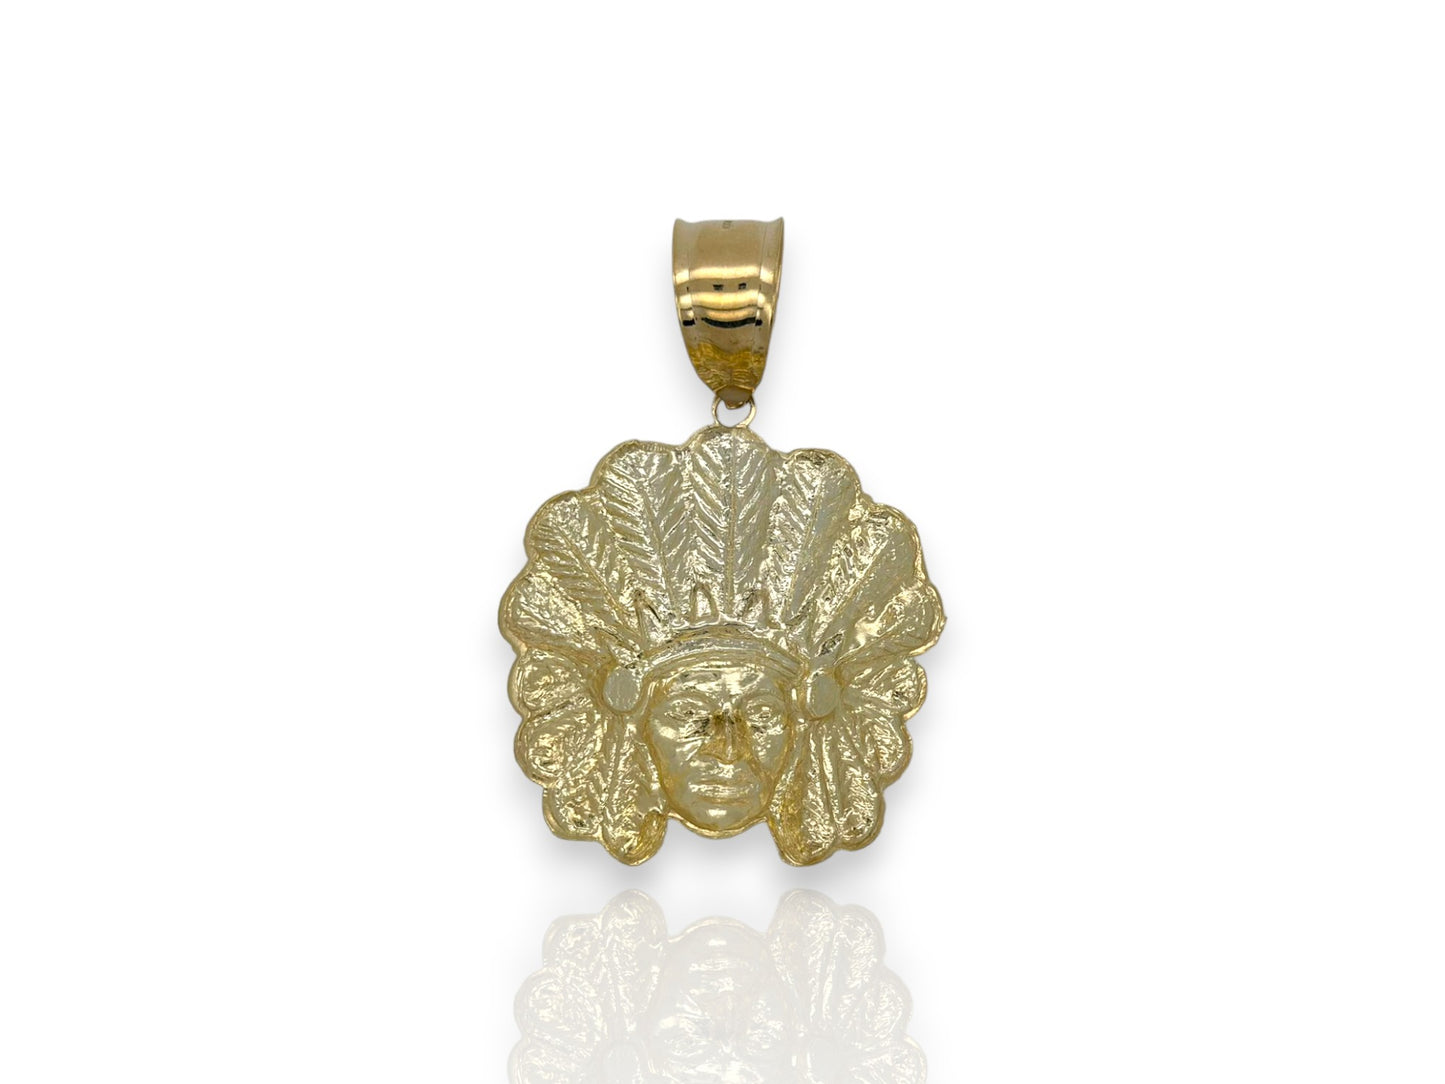 American Indian Native "Chief" Pendant CZ - 10k Yellow Gold